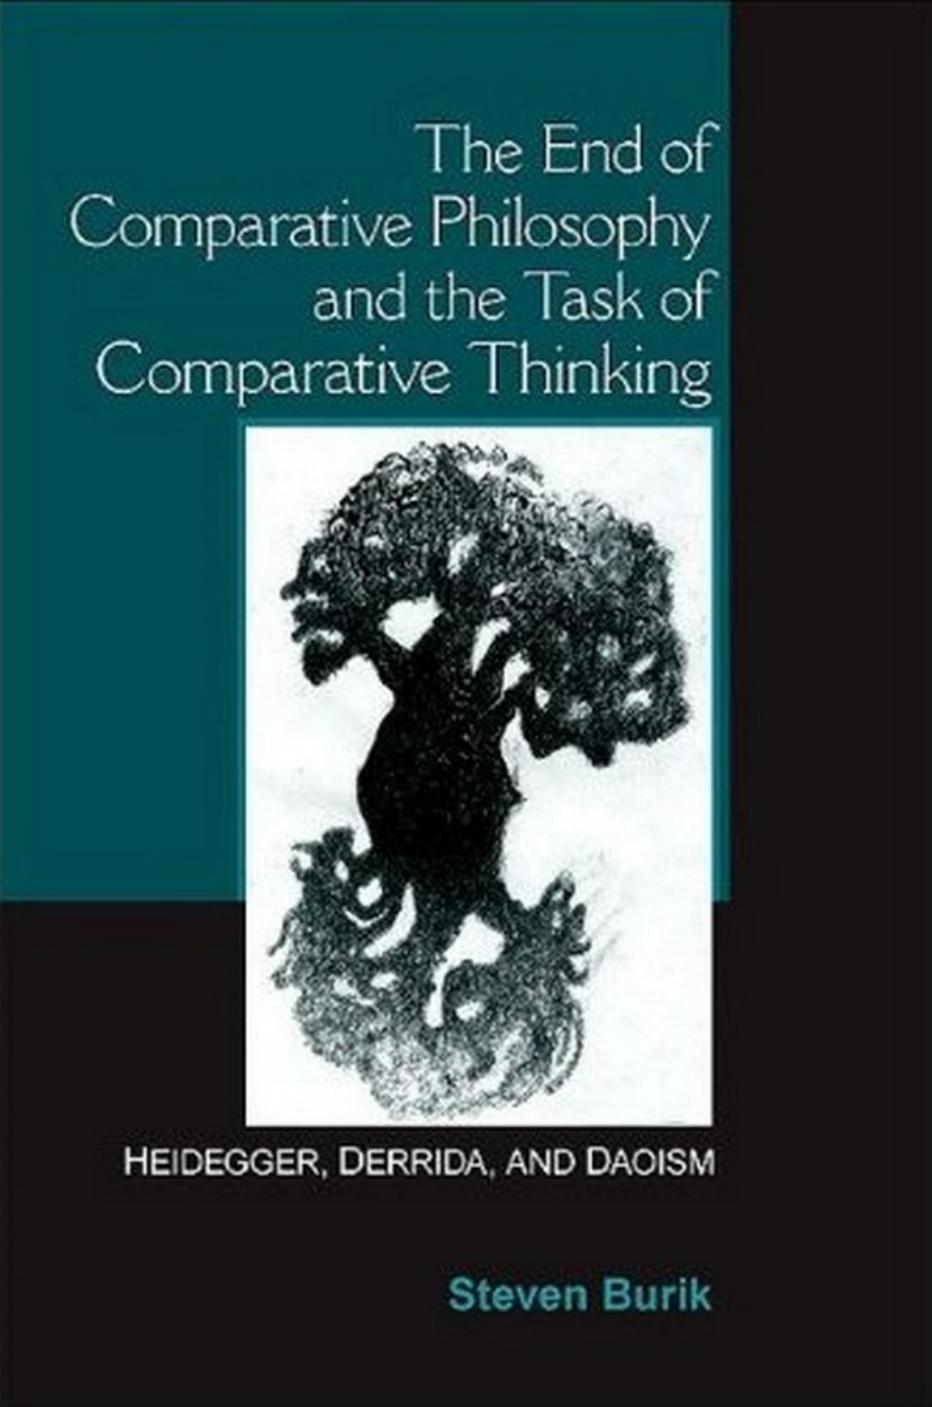 The End of Comparative Philosophy and the Task of Comparative Thinking by Steven Burik